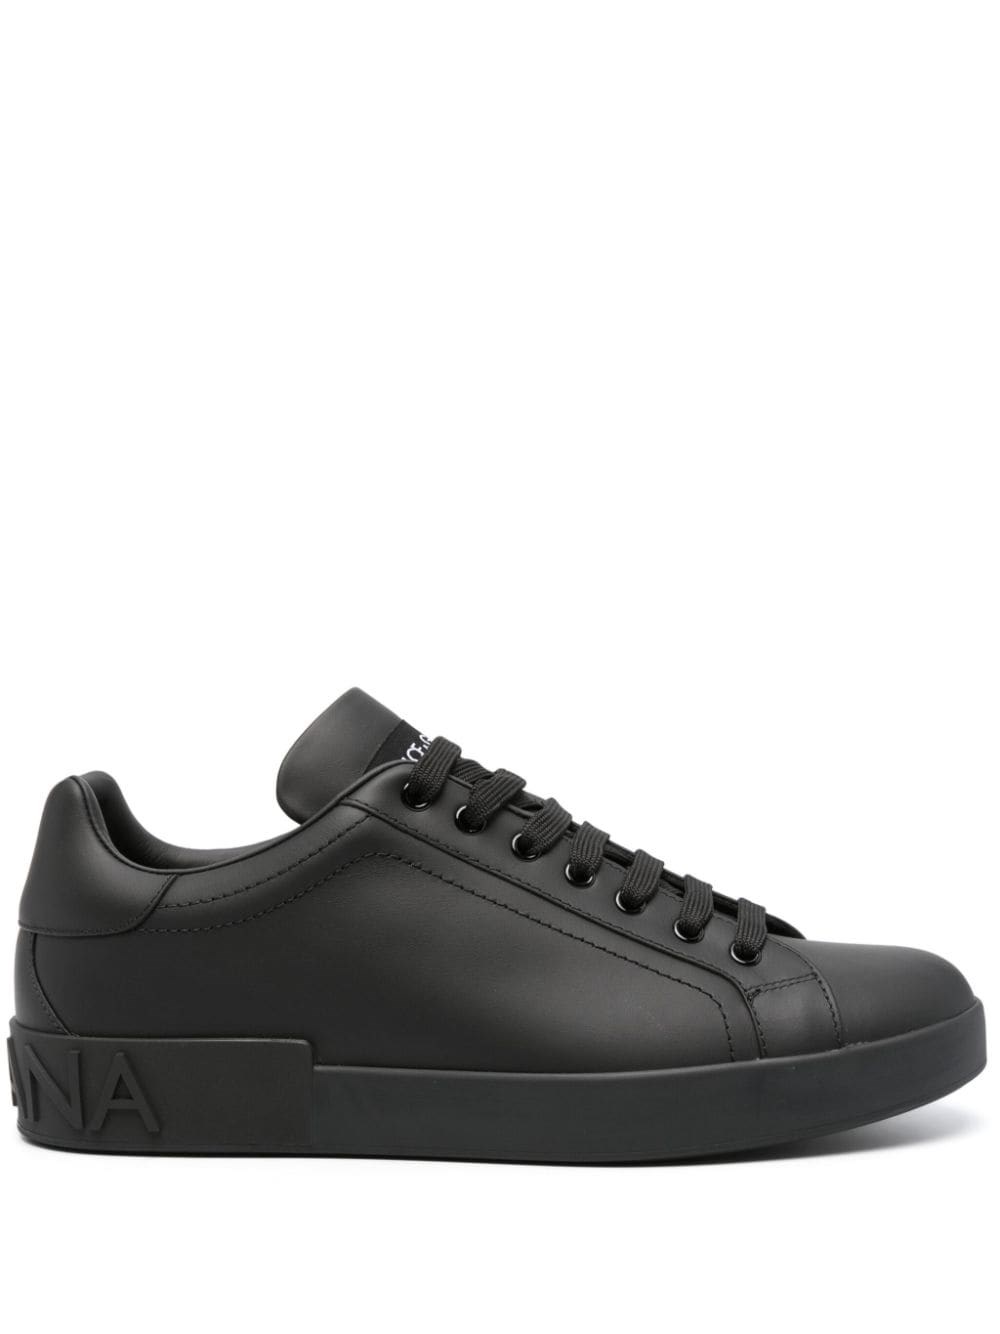 Dolce & Gabbana Leather Trainer In Black